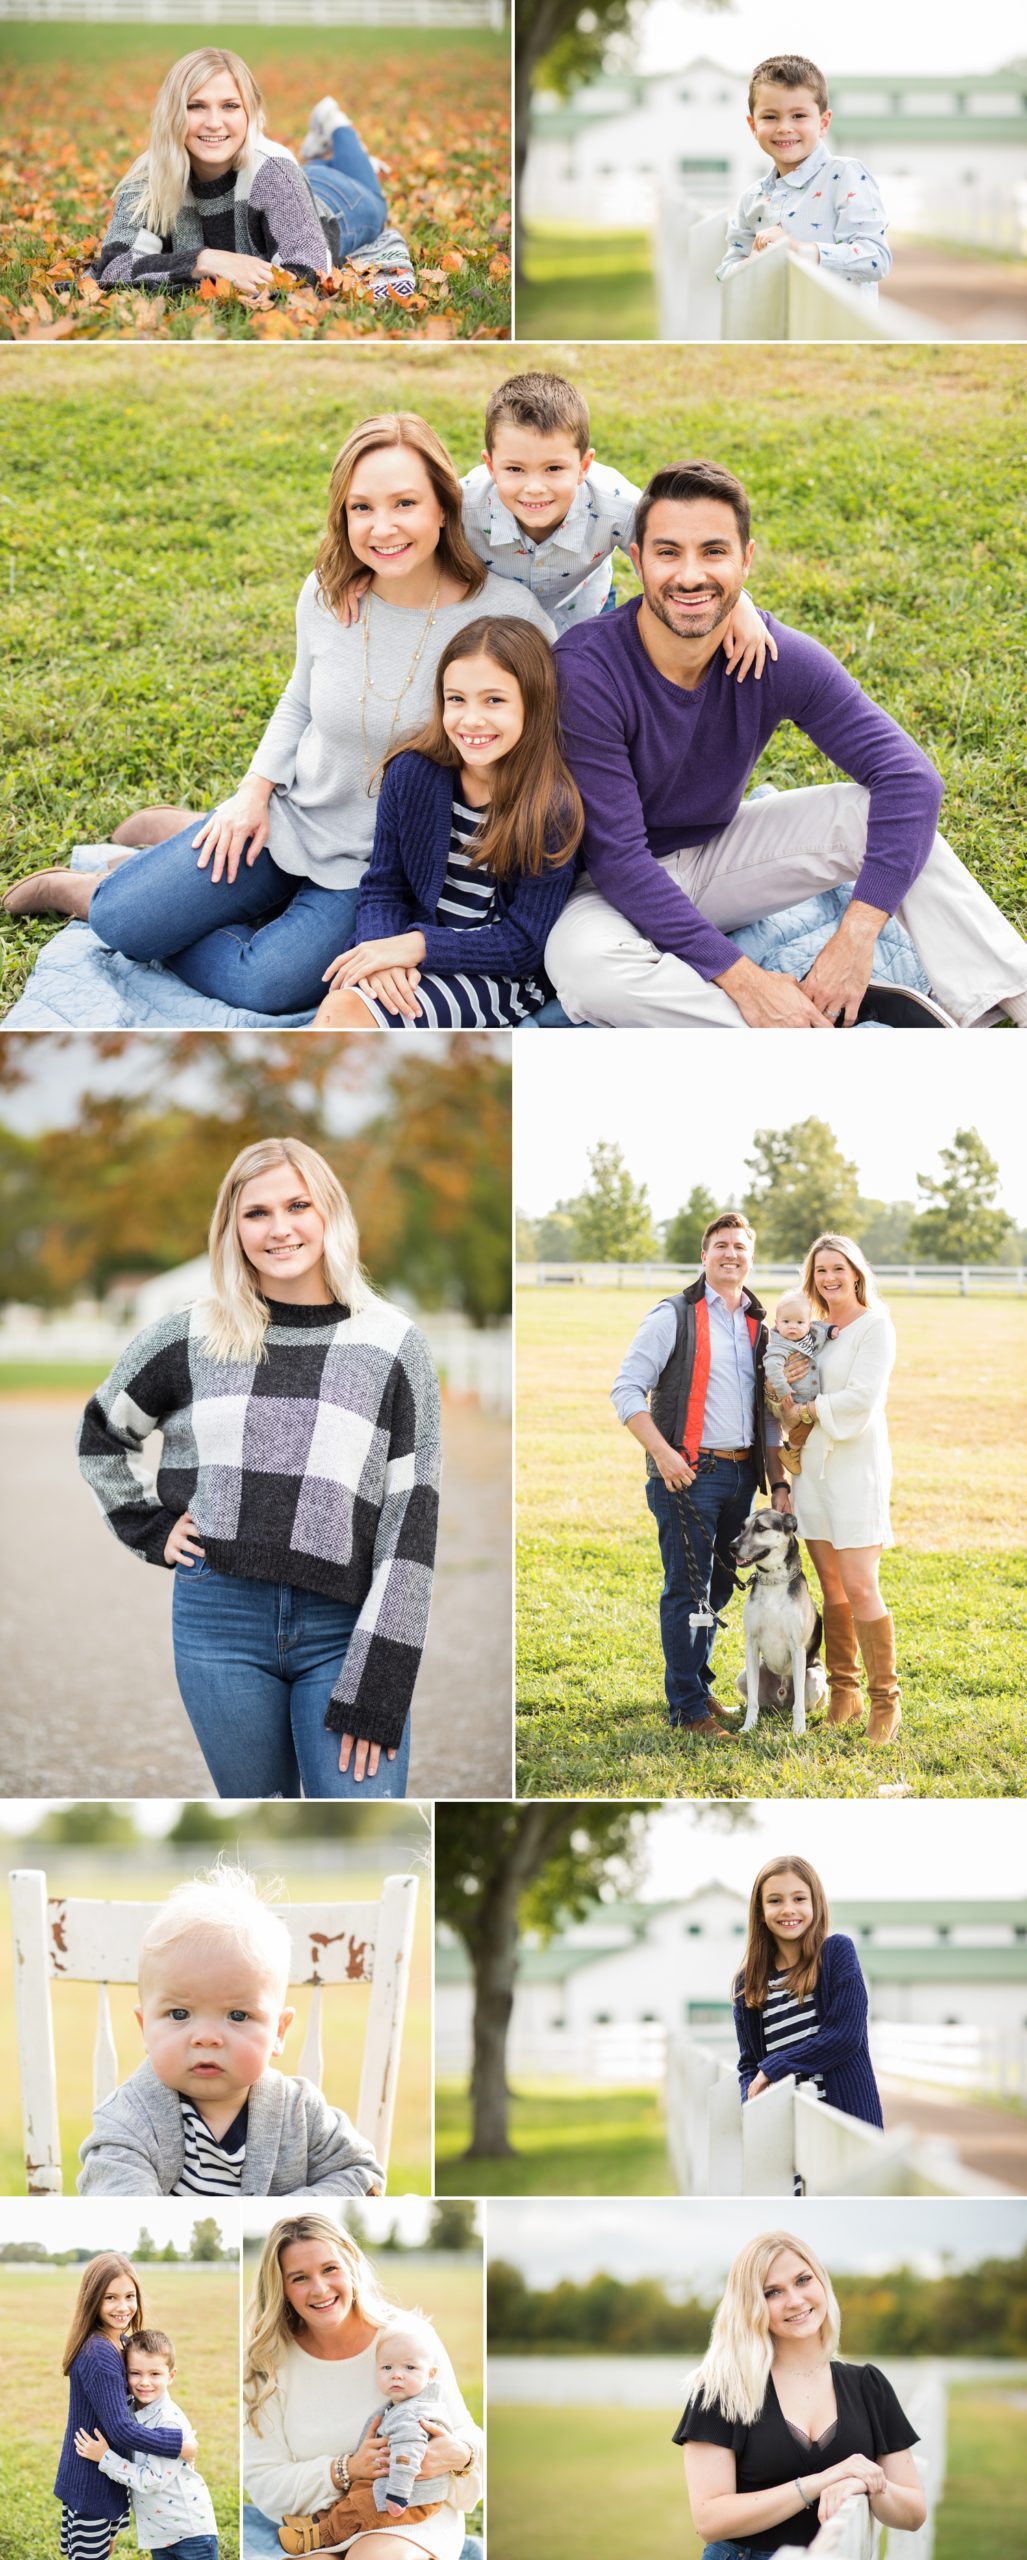 Family photos at Harlinsdale Farm in Franklin, TN. Photography by Krista Lee Photography Nashville TN